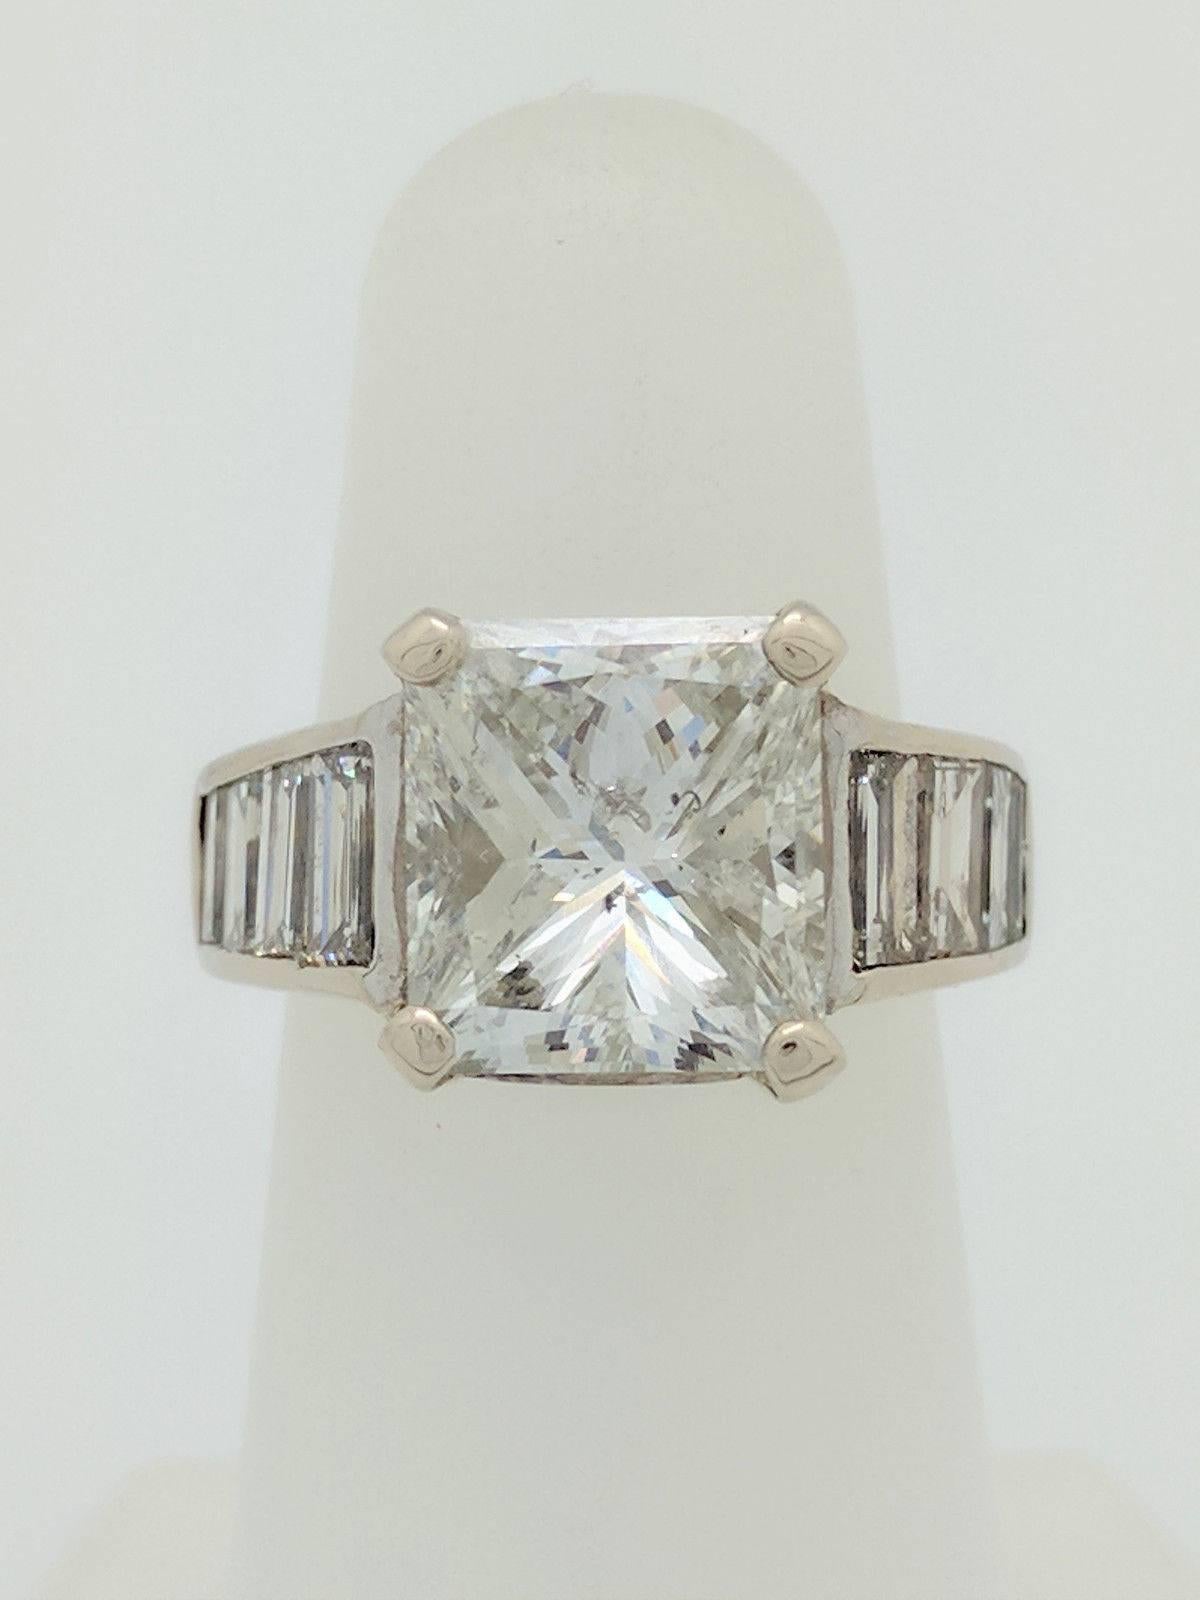 14K White Gold 4.80ct Princess Cut Diamond Engagement Ring I1/G
 
You are viewing a beautiful 4.80ct natural princess cut diamond. We estimate this diamond to be I1 in clarity and G in color. The diamond is beautifully displayed in a 14k white gold